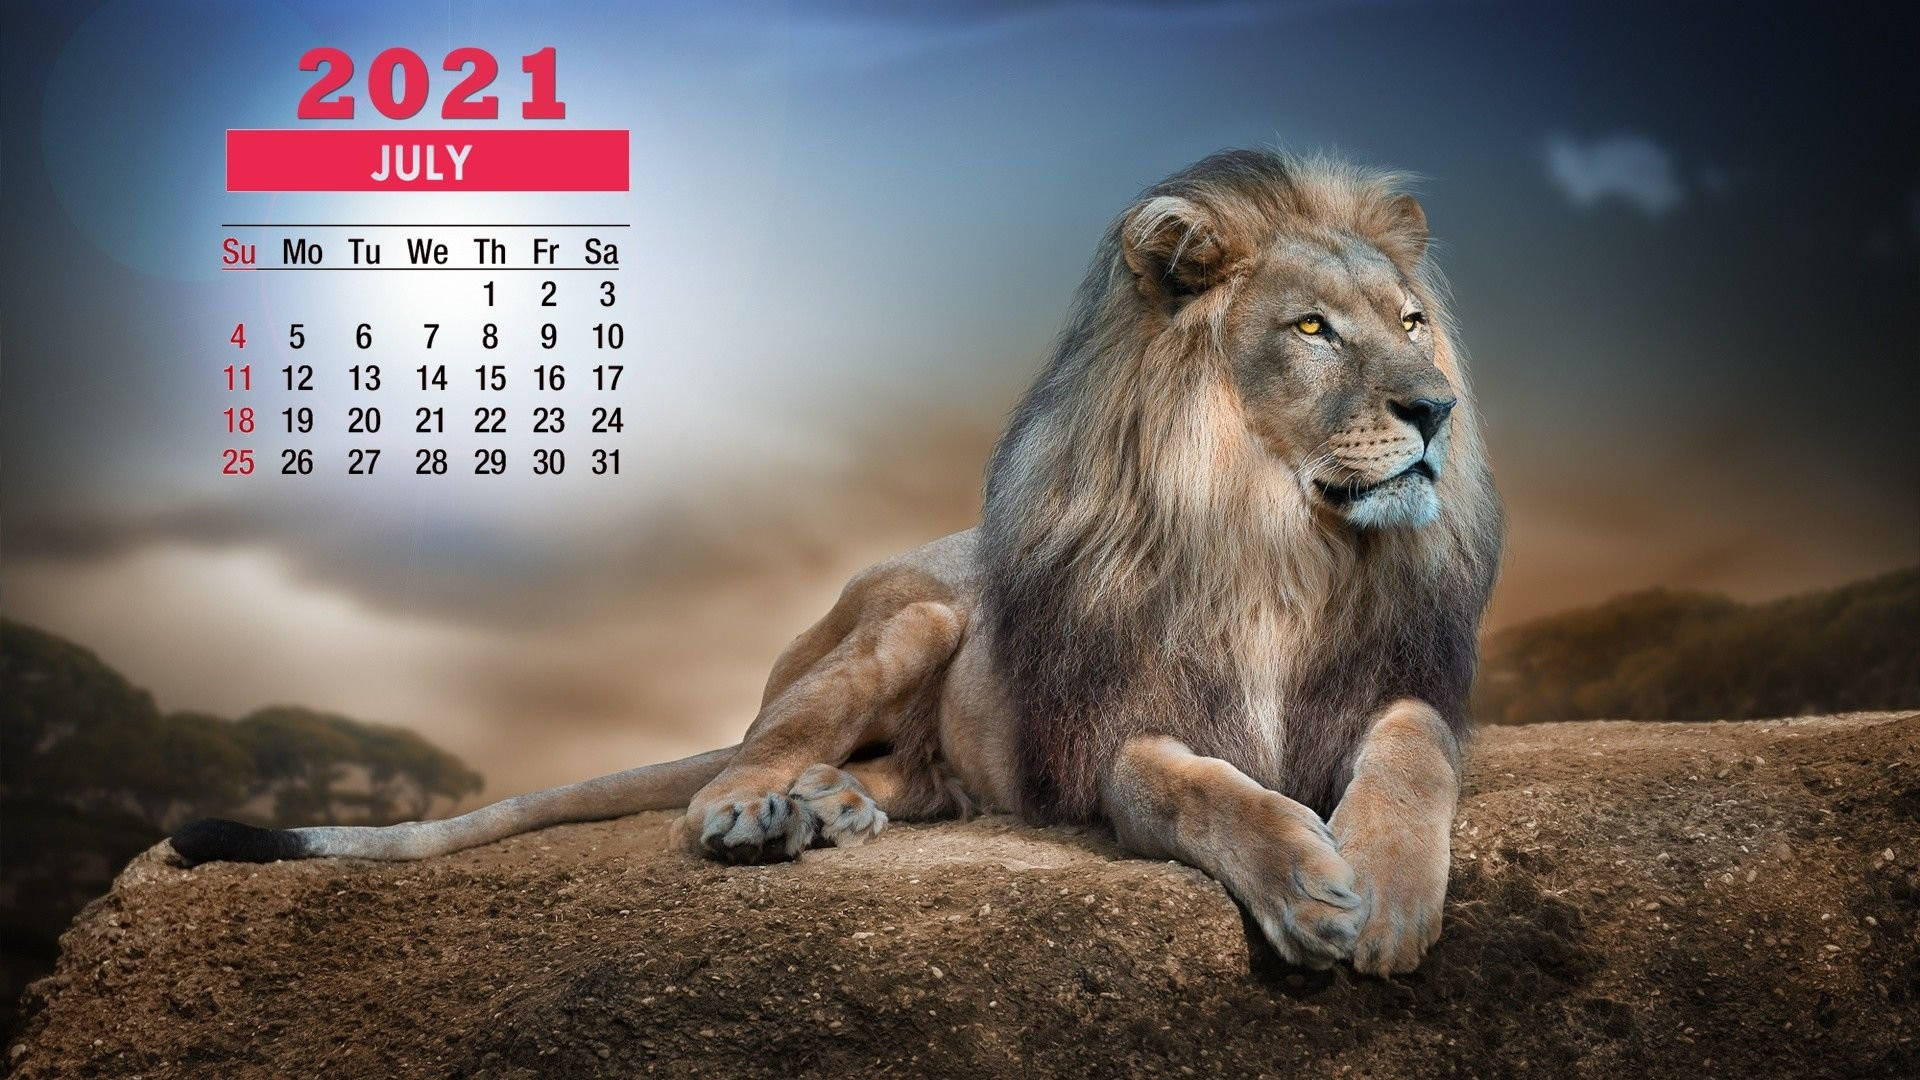 July 2021 Calendar With A Lion Background